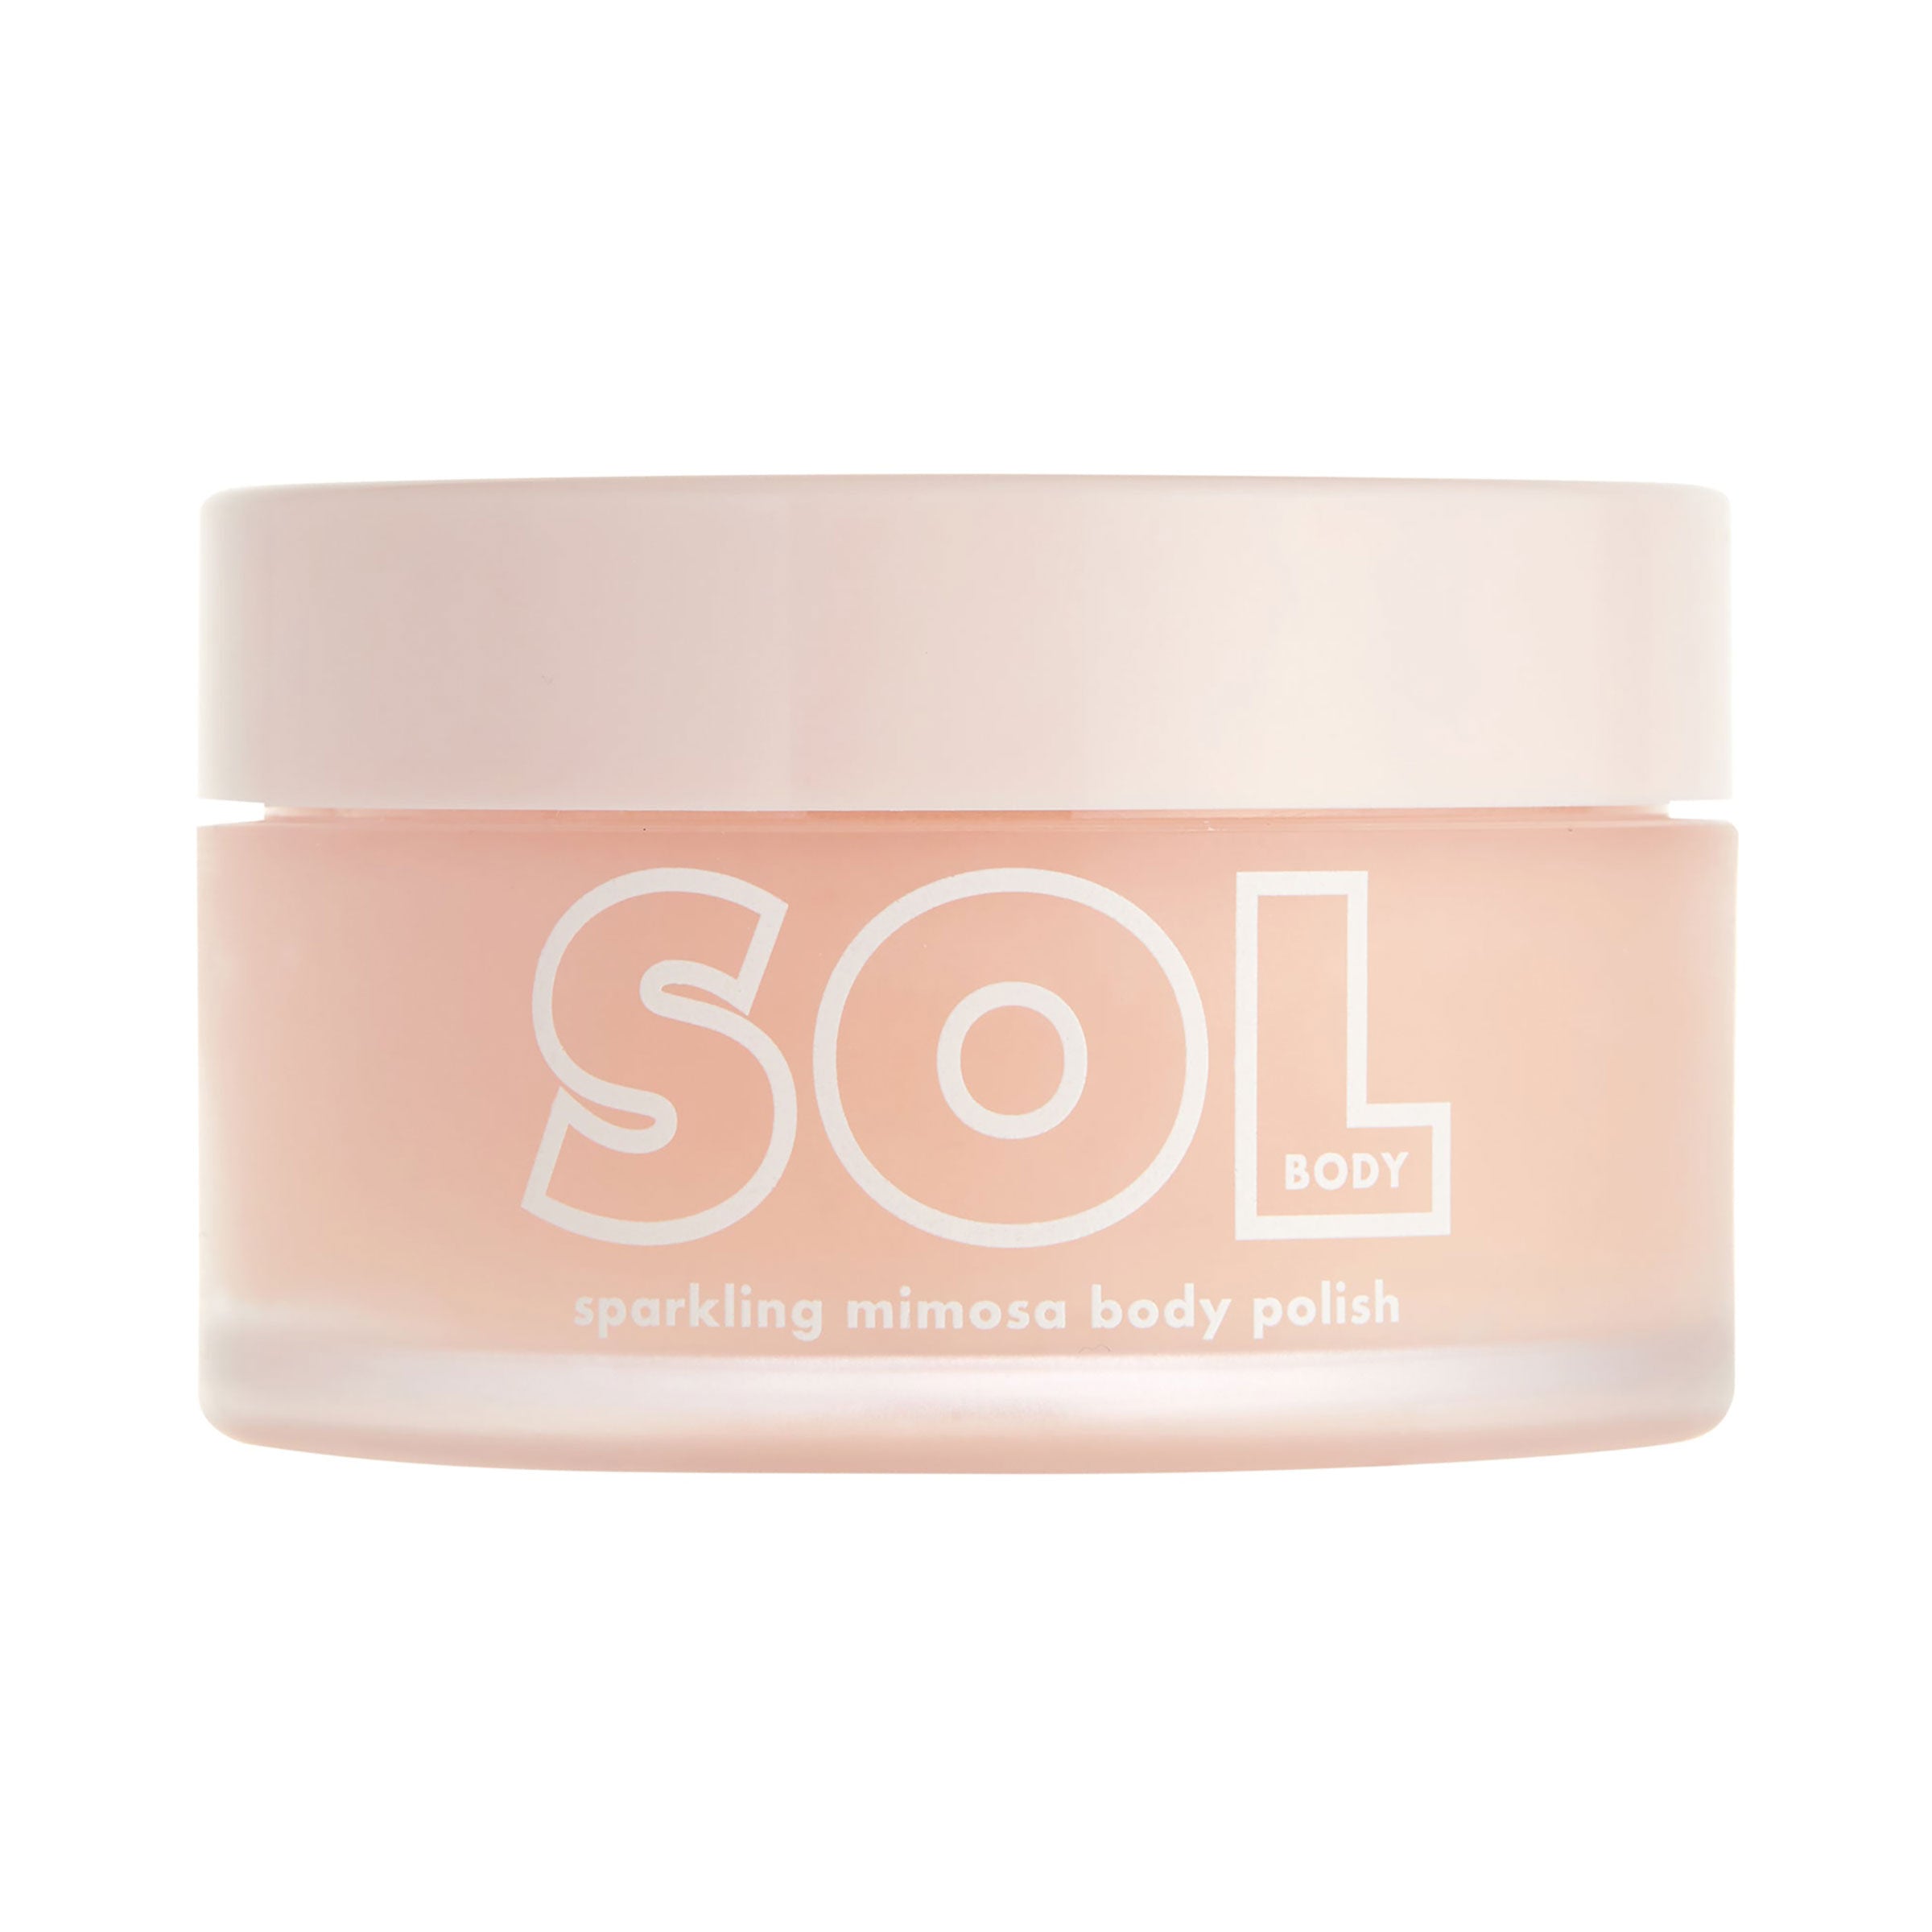 SOL Body Sparkling Mimosa Body Polish – A luscious body polish gently buffs and exfoliates to reveal skin so silky soft and smooth.